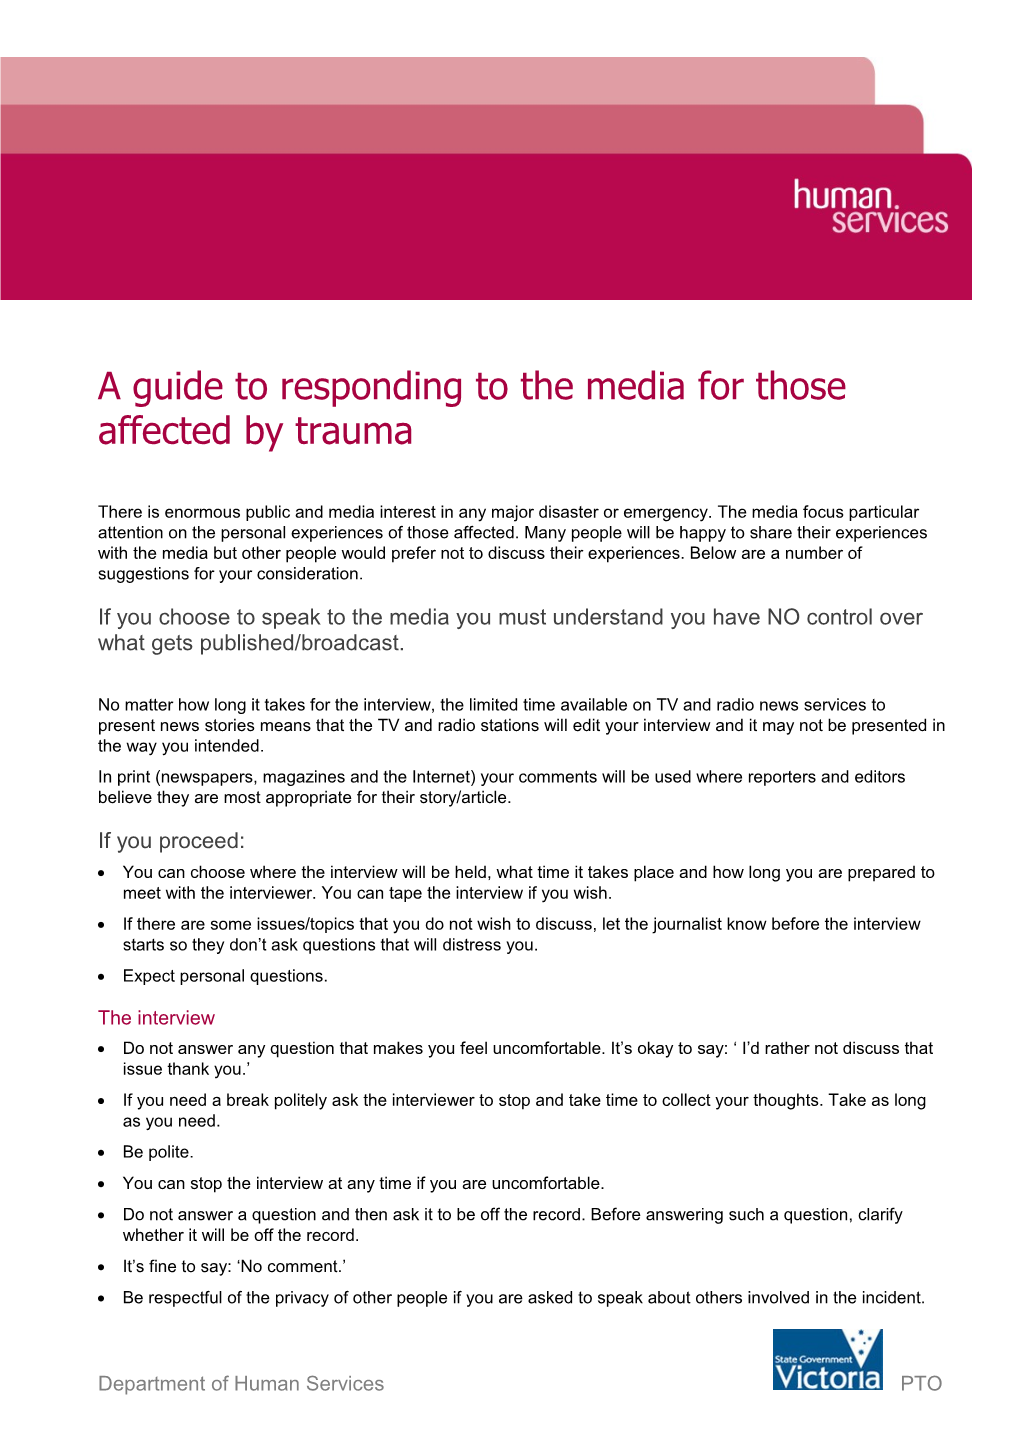 A Guide to Responding to the Media for Those Affected by Trauma